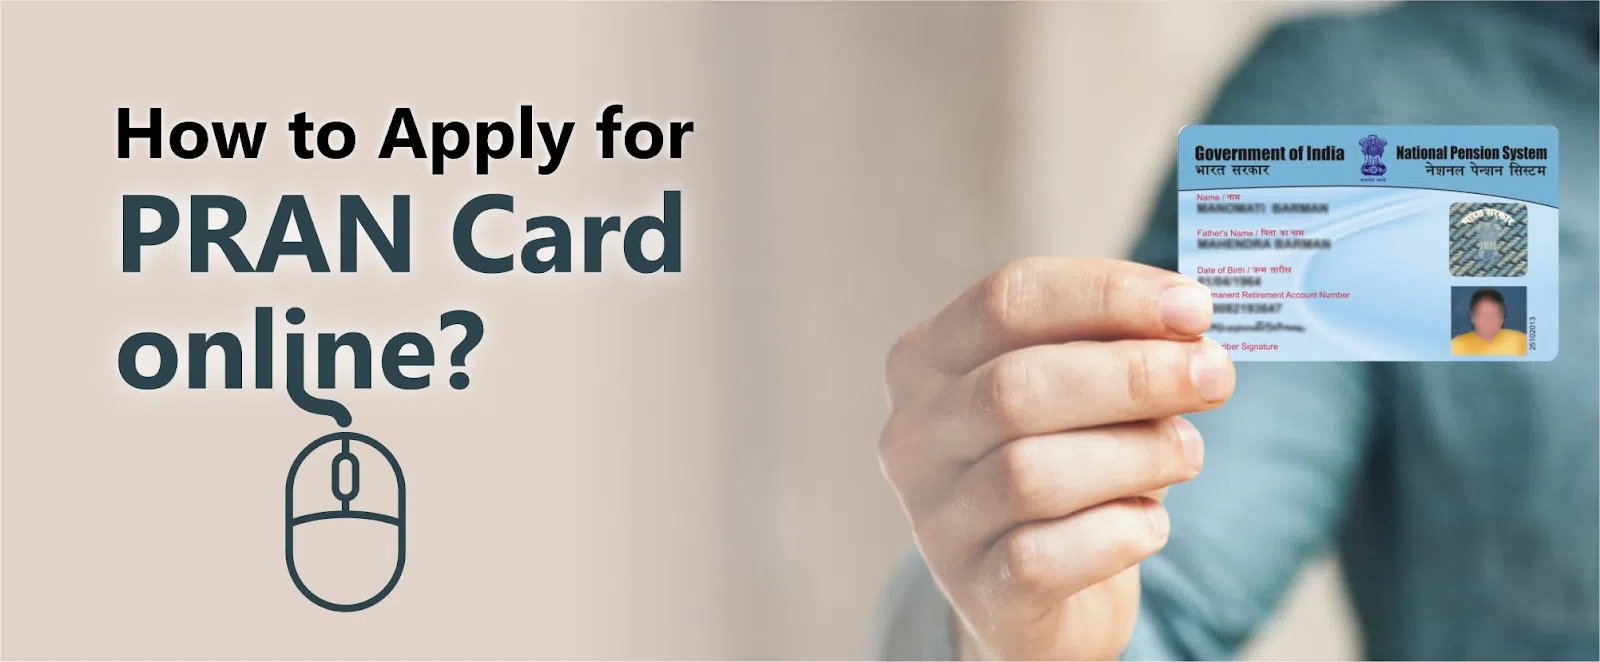 Step-by-Step Guide To Apply For A PRAN Card Online